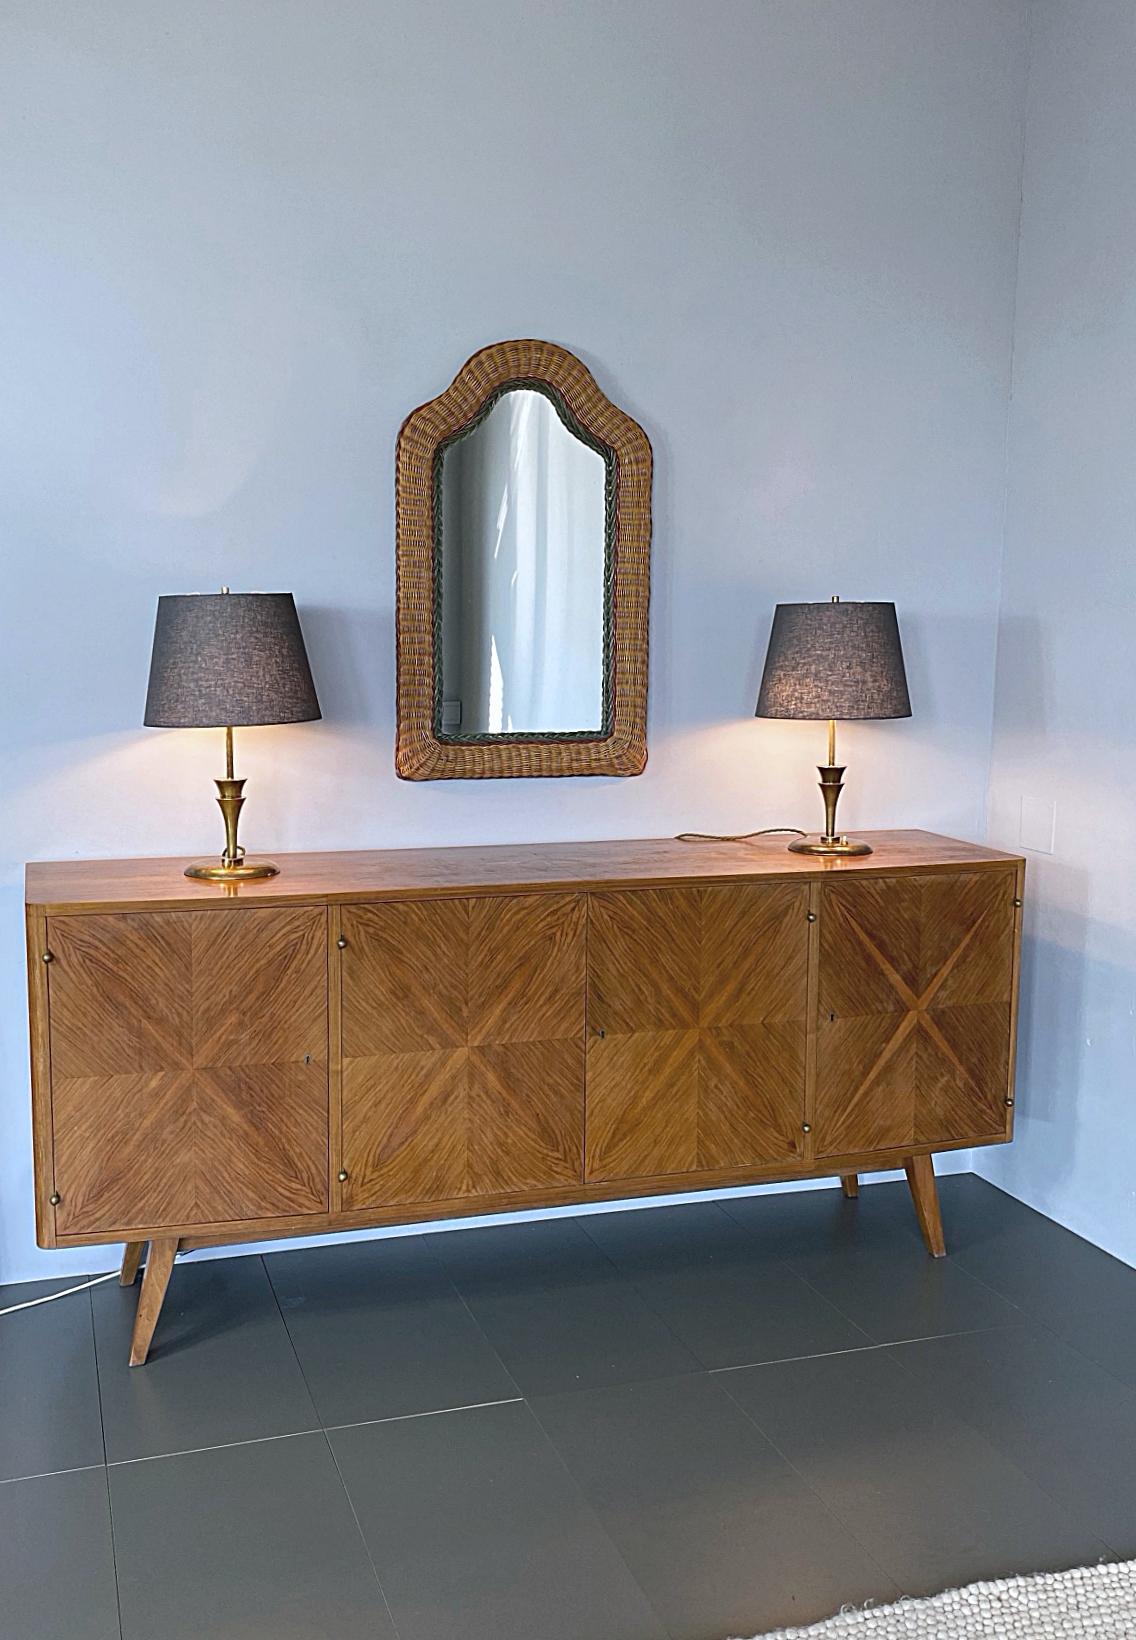 Hand-Crafted Artisanal Wicker Rattan Midcentury Arched Wall Mirror, 1960s, France For Sale